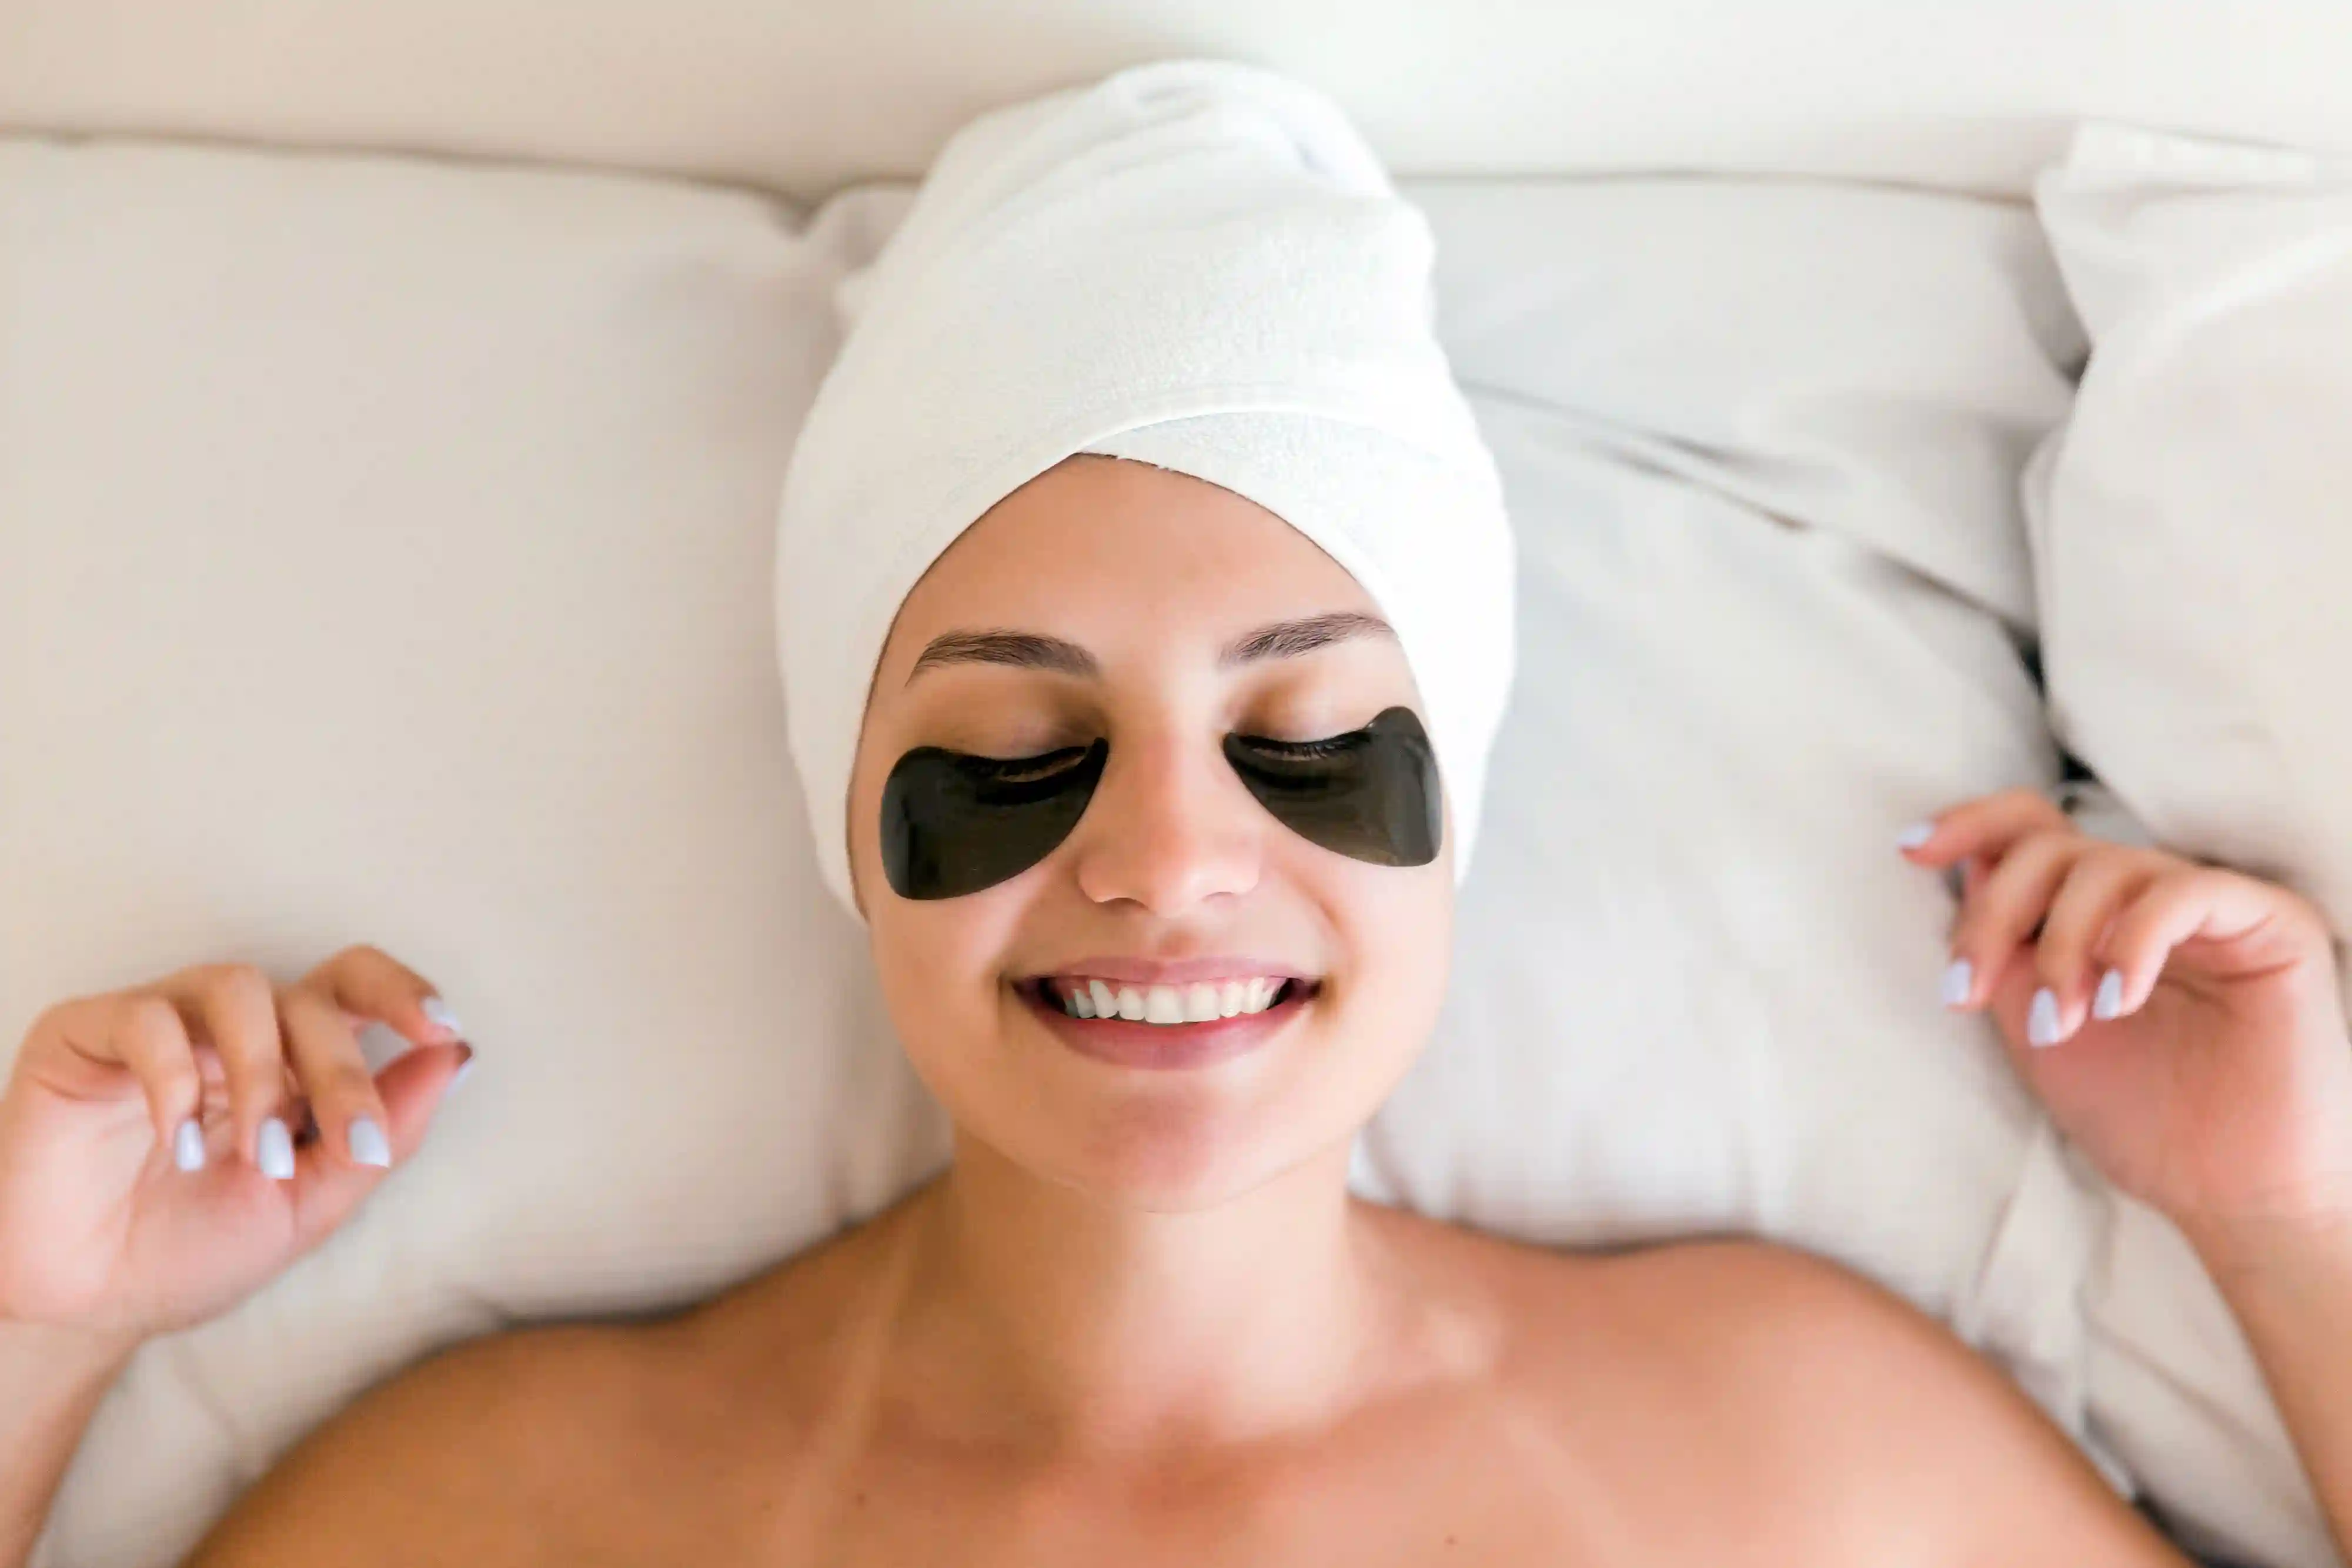 What are the best under-eye patches celebrities use? Benefits & Uses Revealed